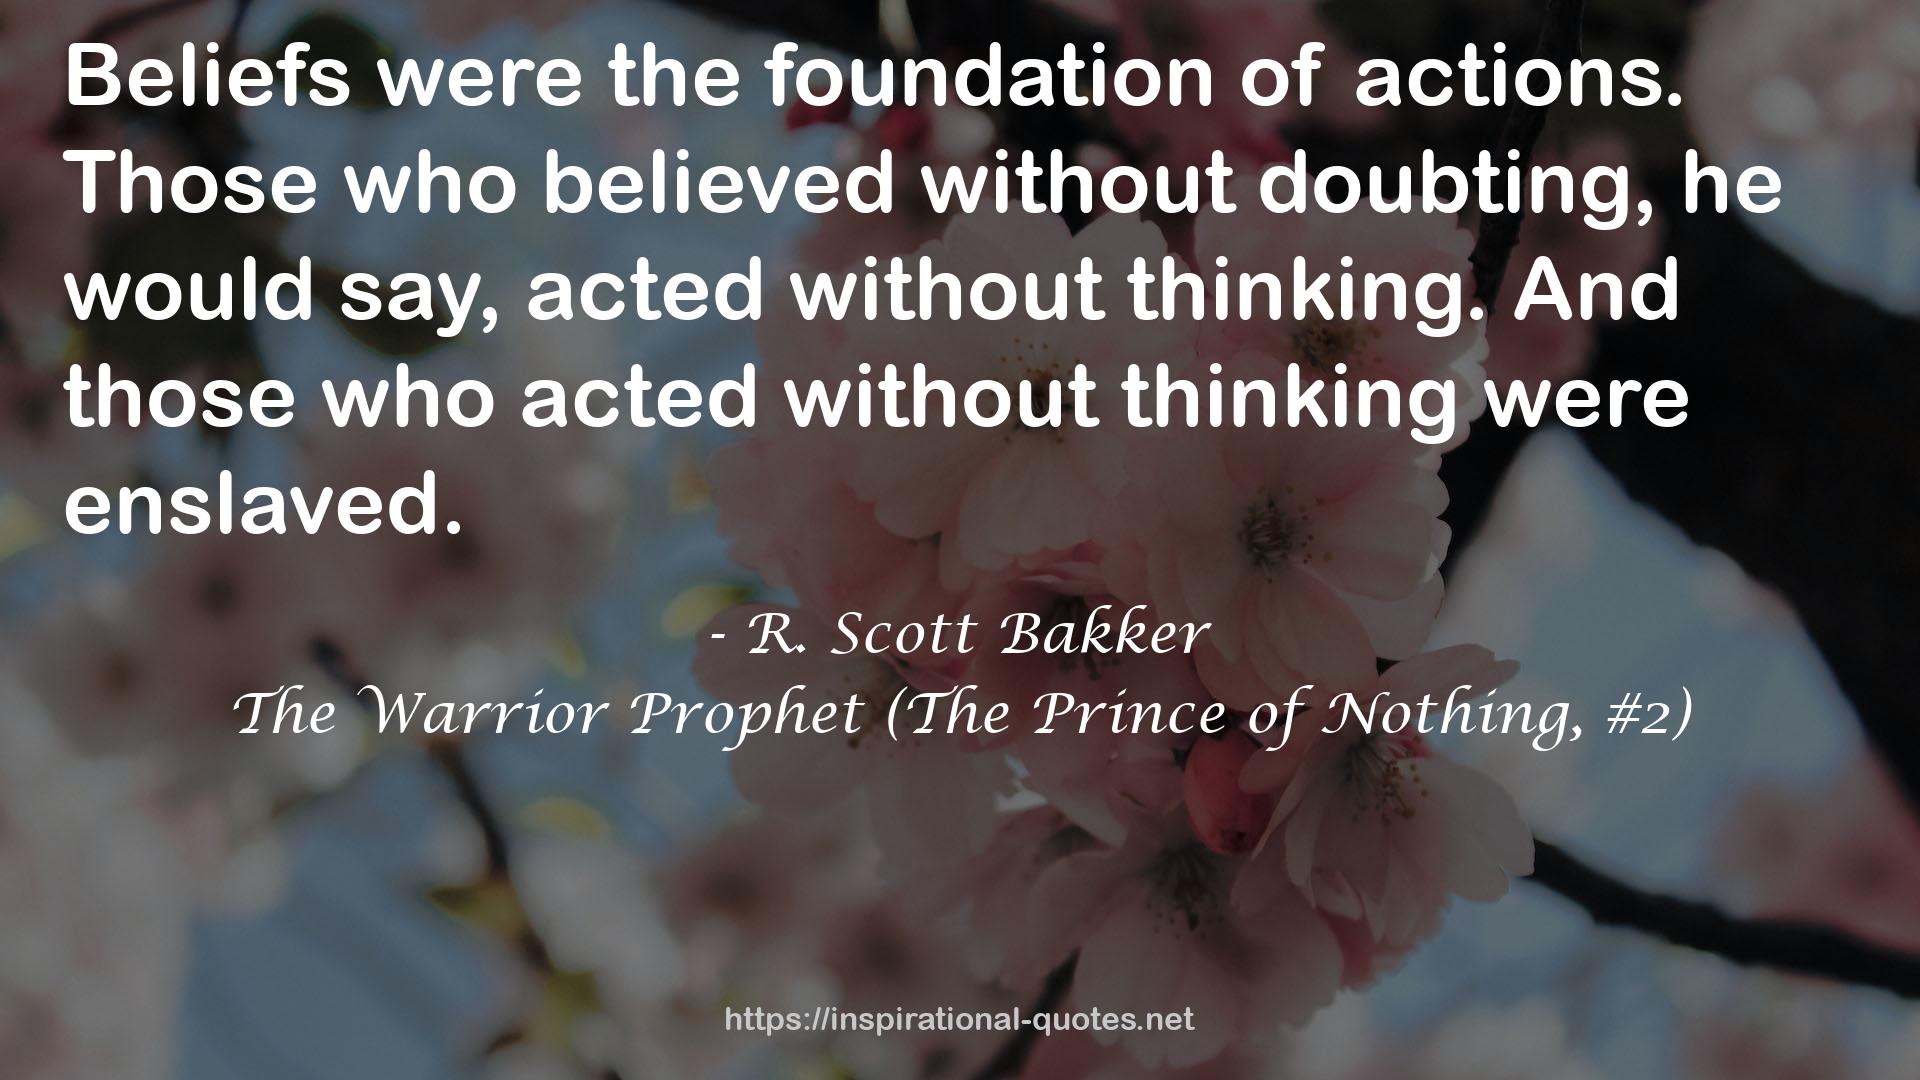 The Warrior Prophet (The Prince of Nothing, #2) QUOTES